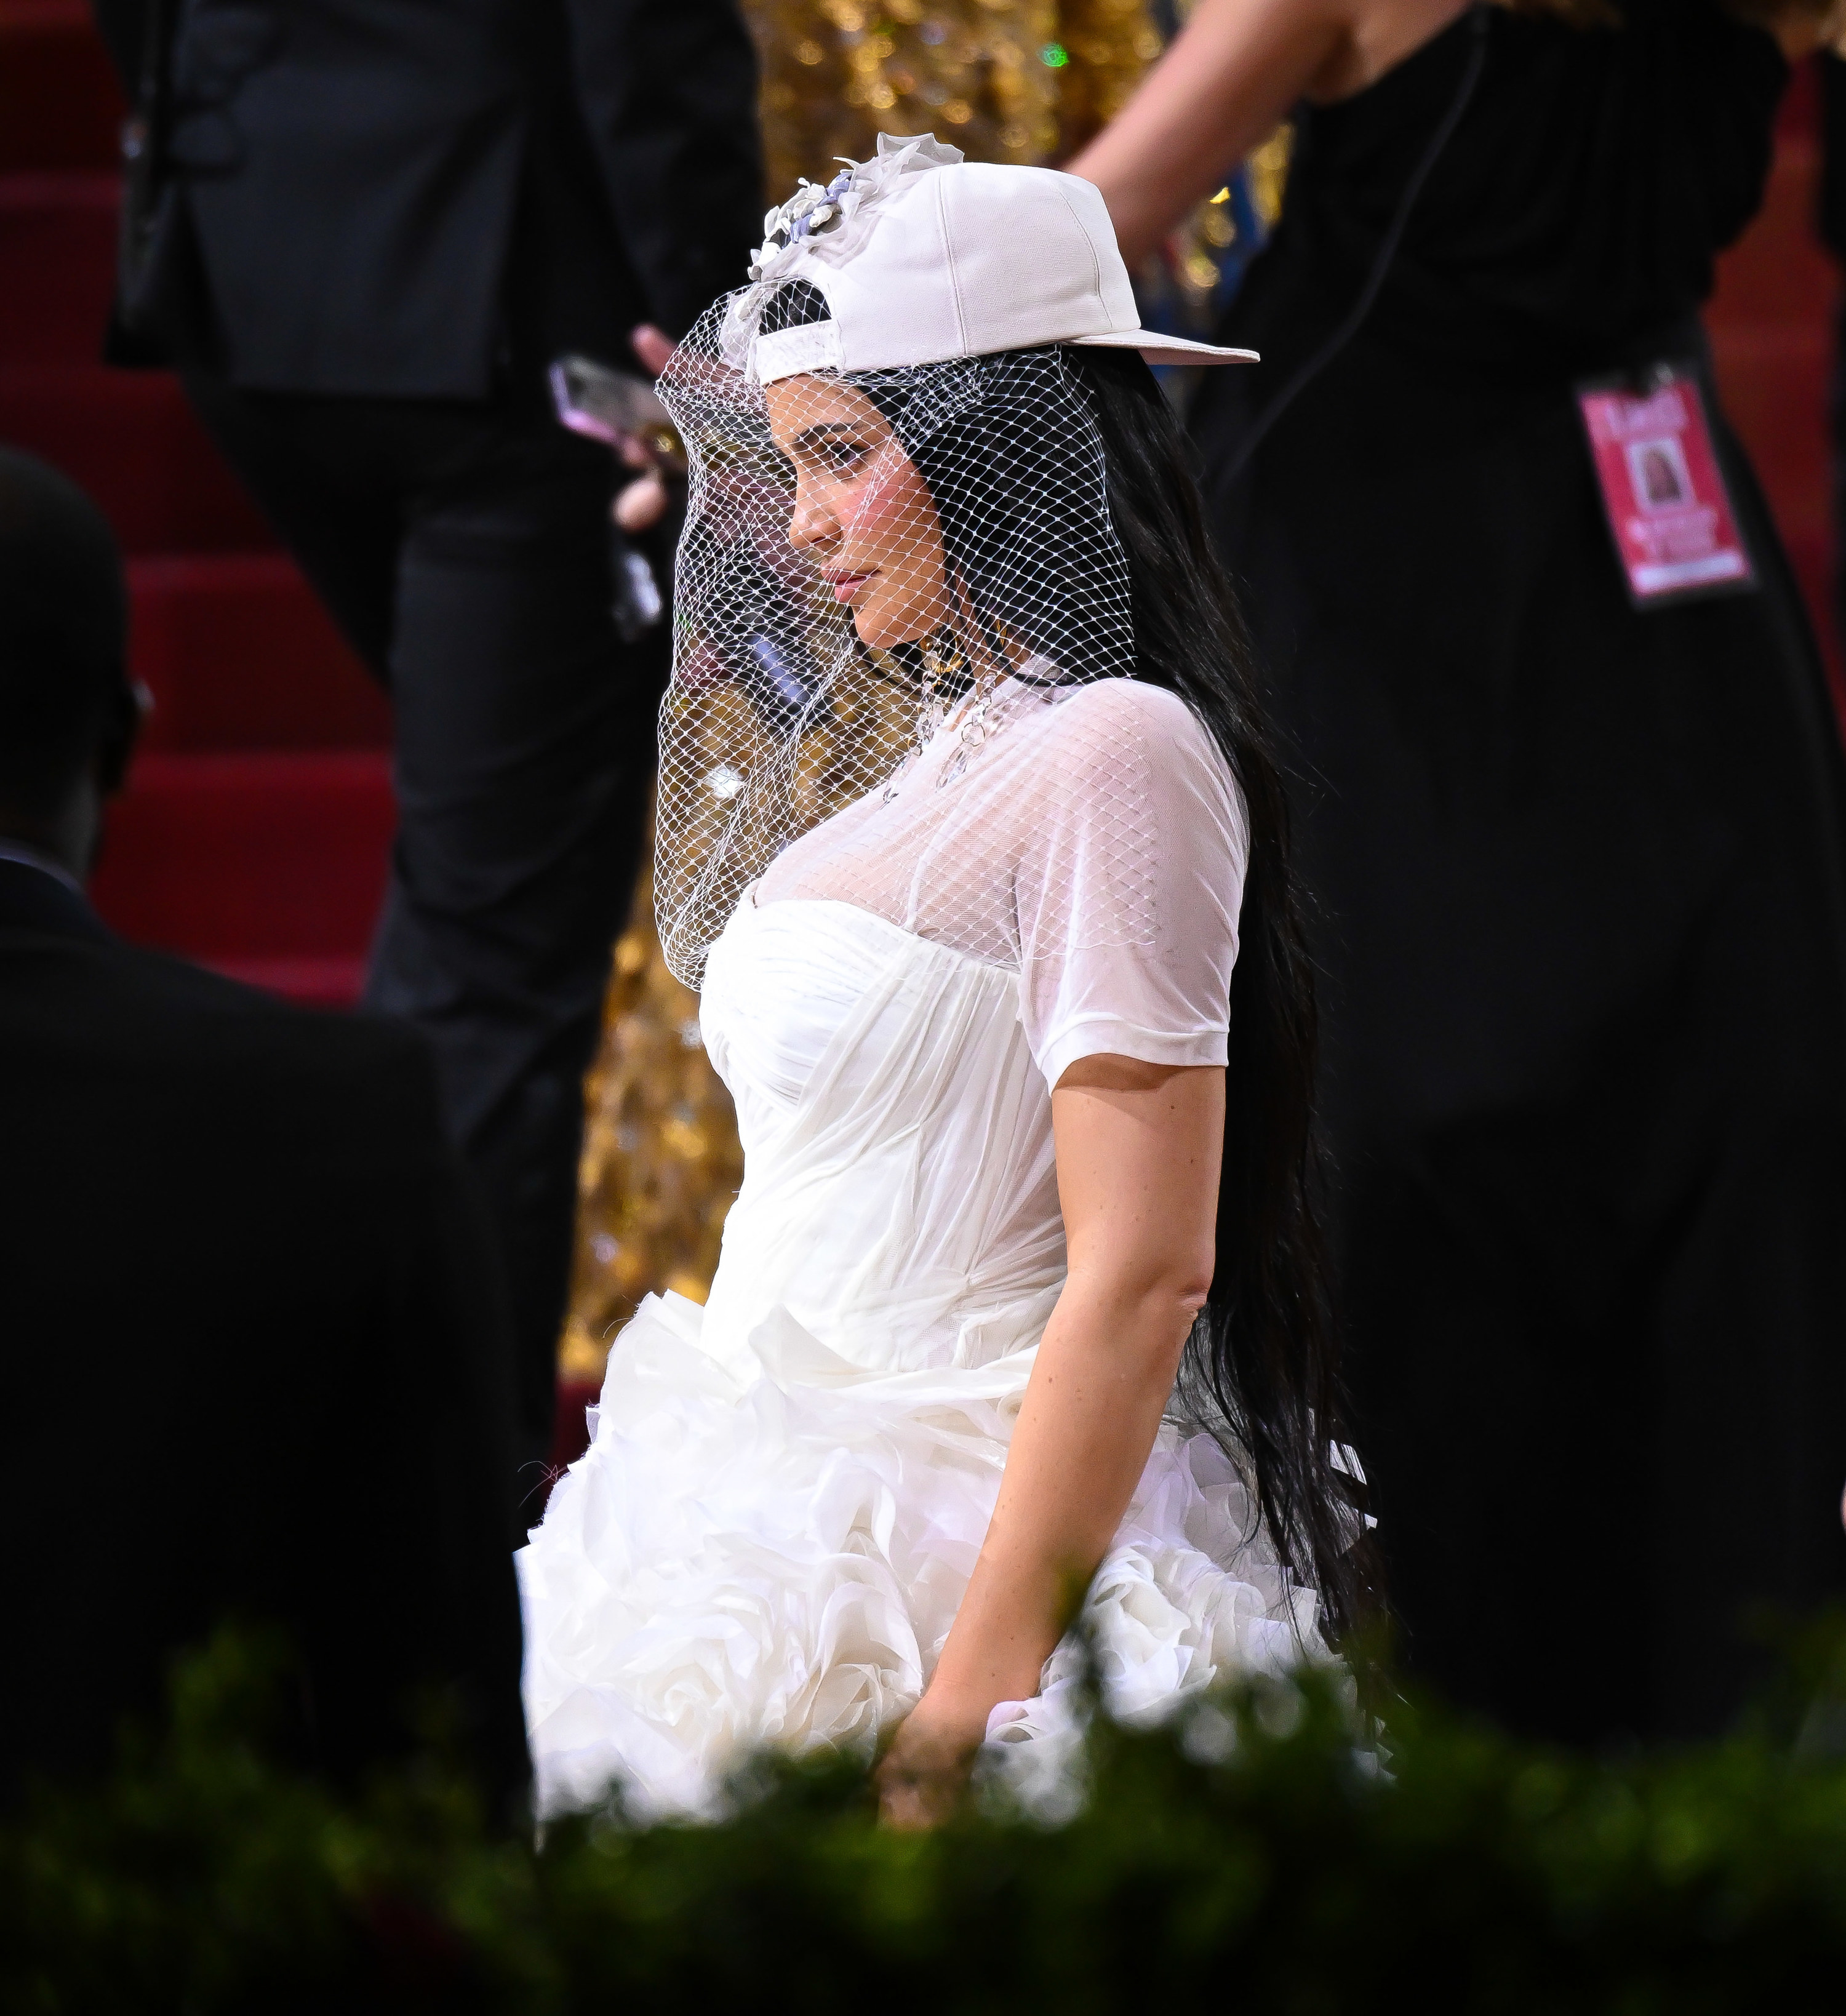 A side view of Kylie posing for photos in her Met Gala outfit